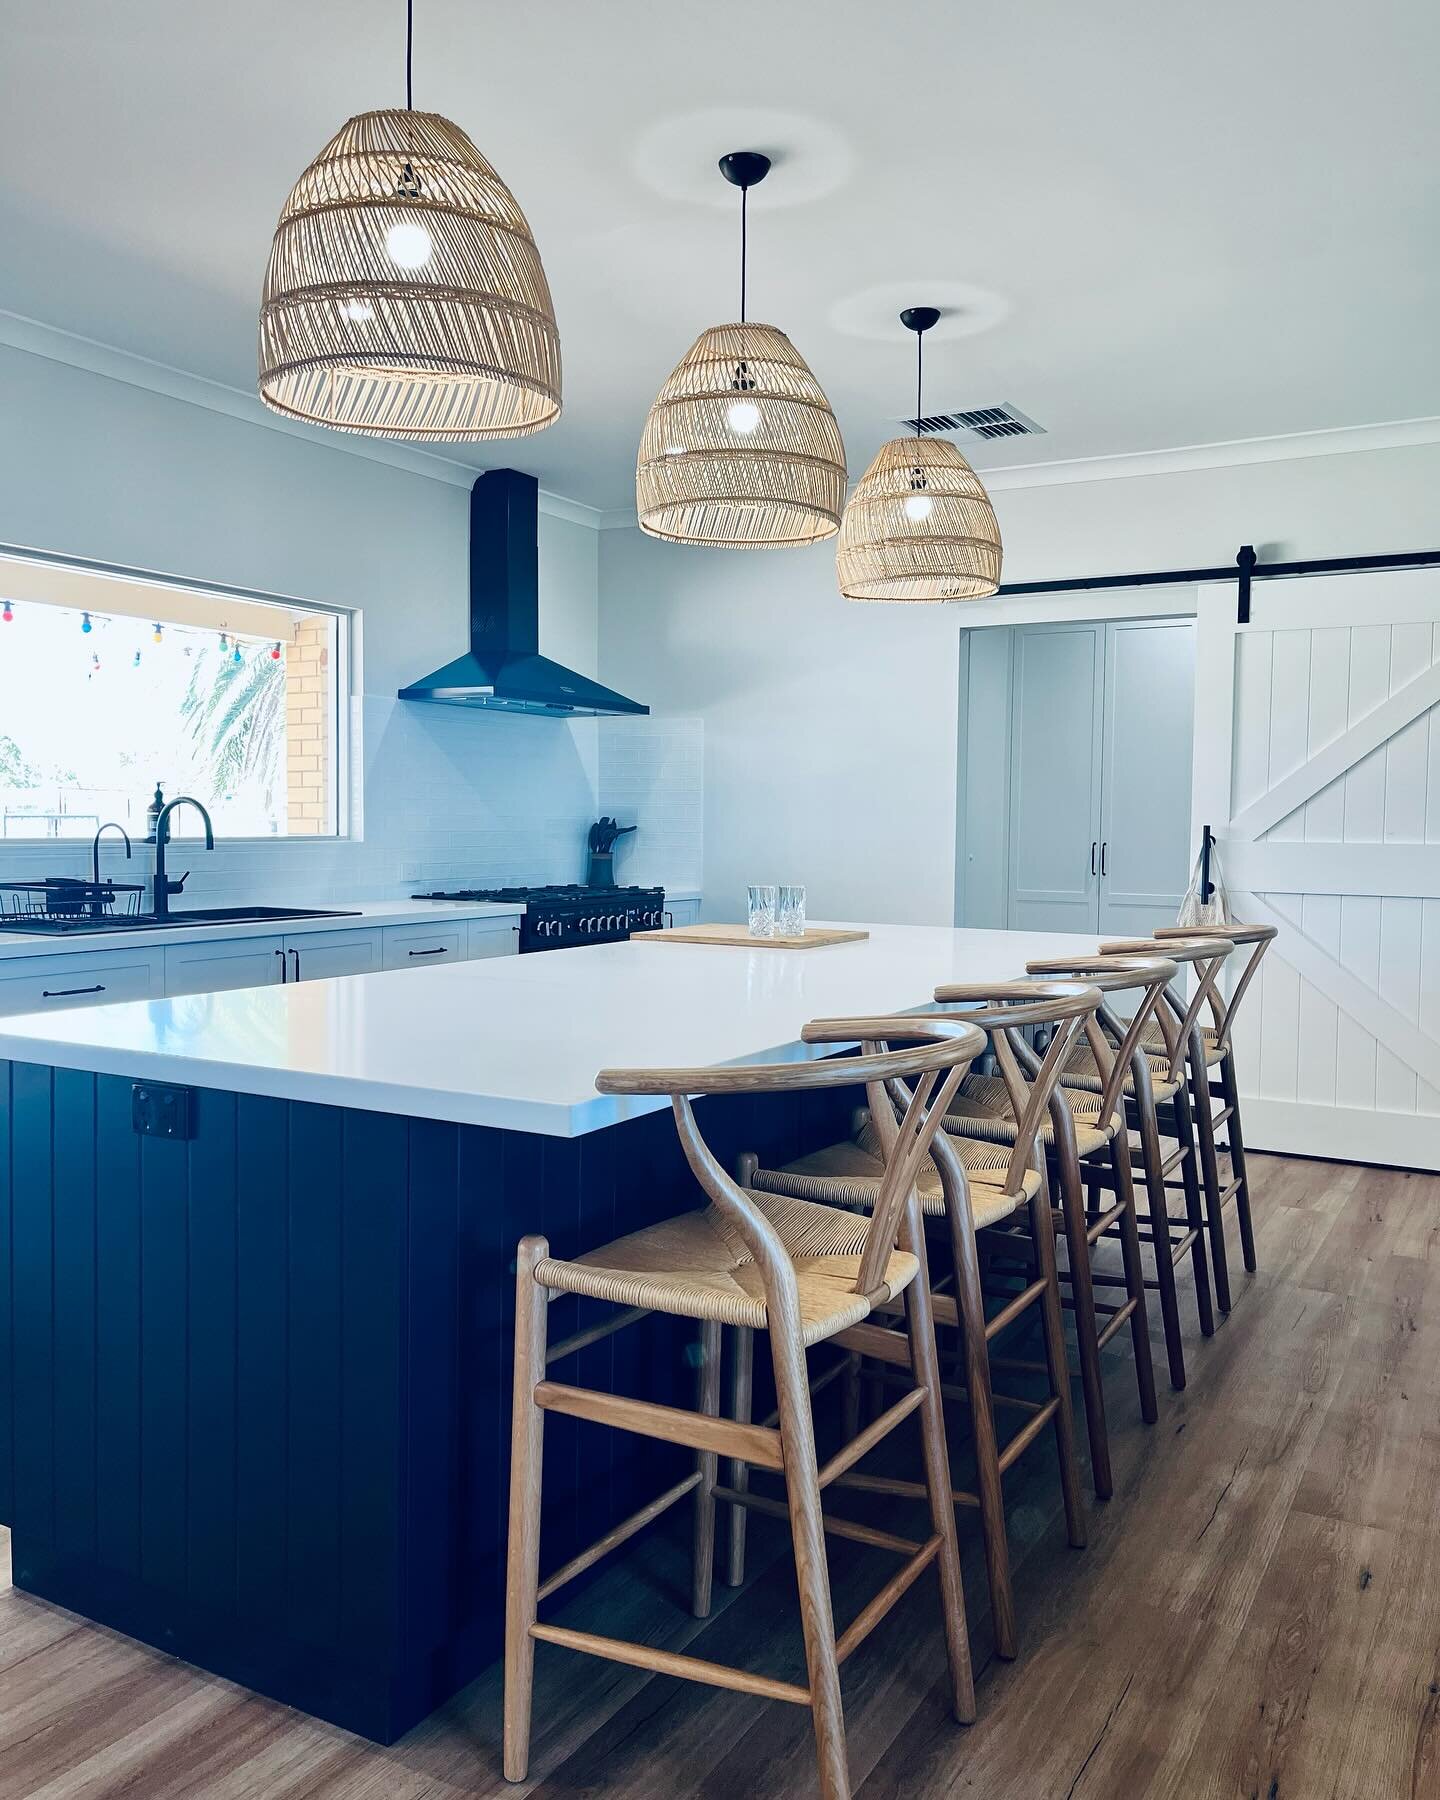 Bencubbin project is conplete and now being enjoyed by this busy family. 

The main space was given a complete overhaul with big new kitchen, walk in pantry, new laundry, new flooring, doors, paint, lighting, the whole sherbang and dosen&rsquo;t the 